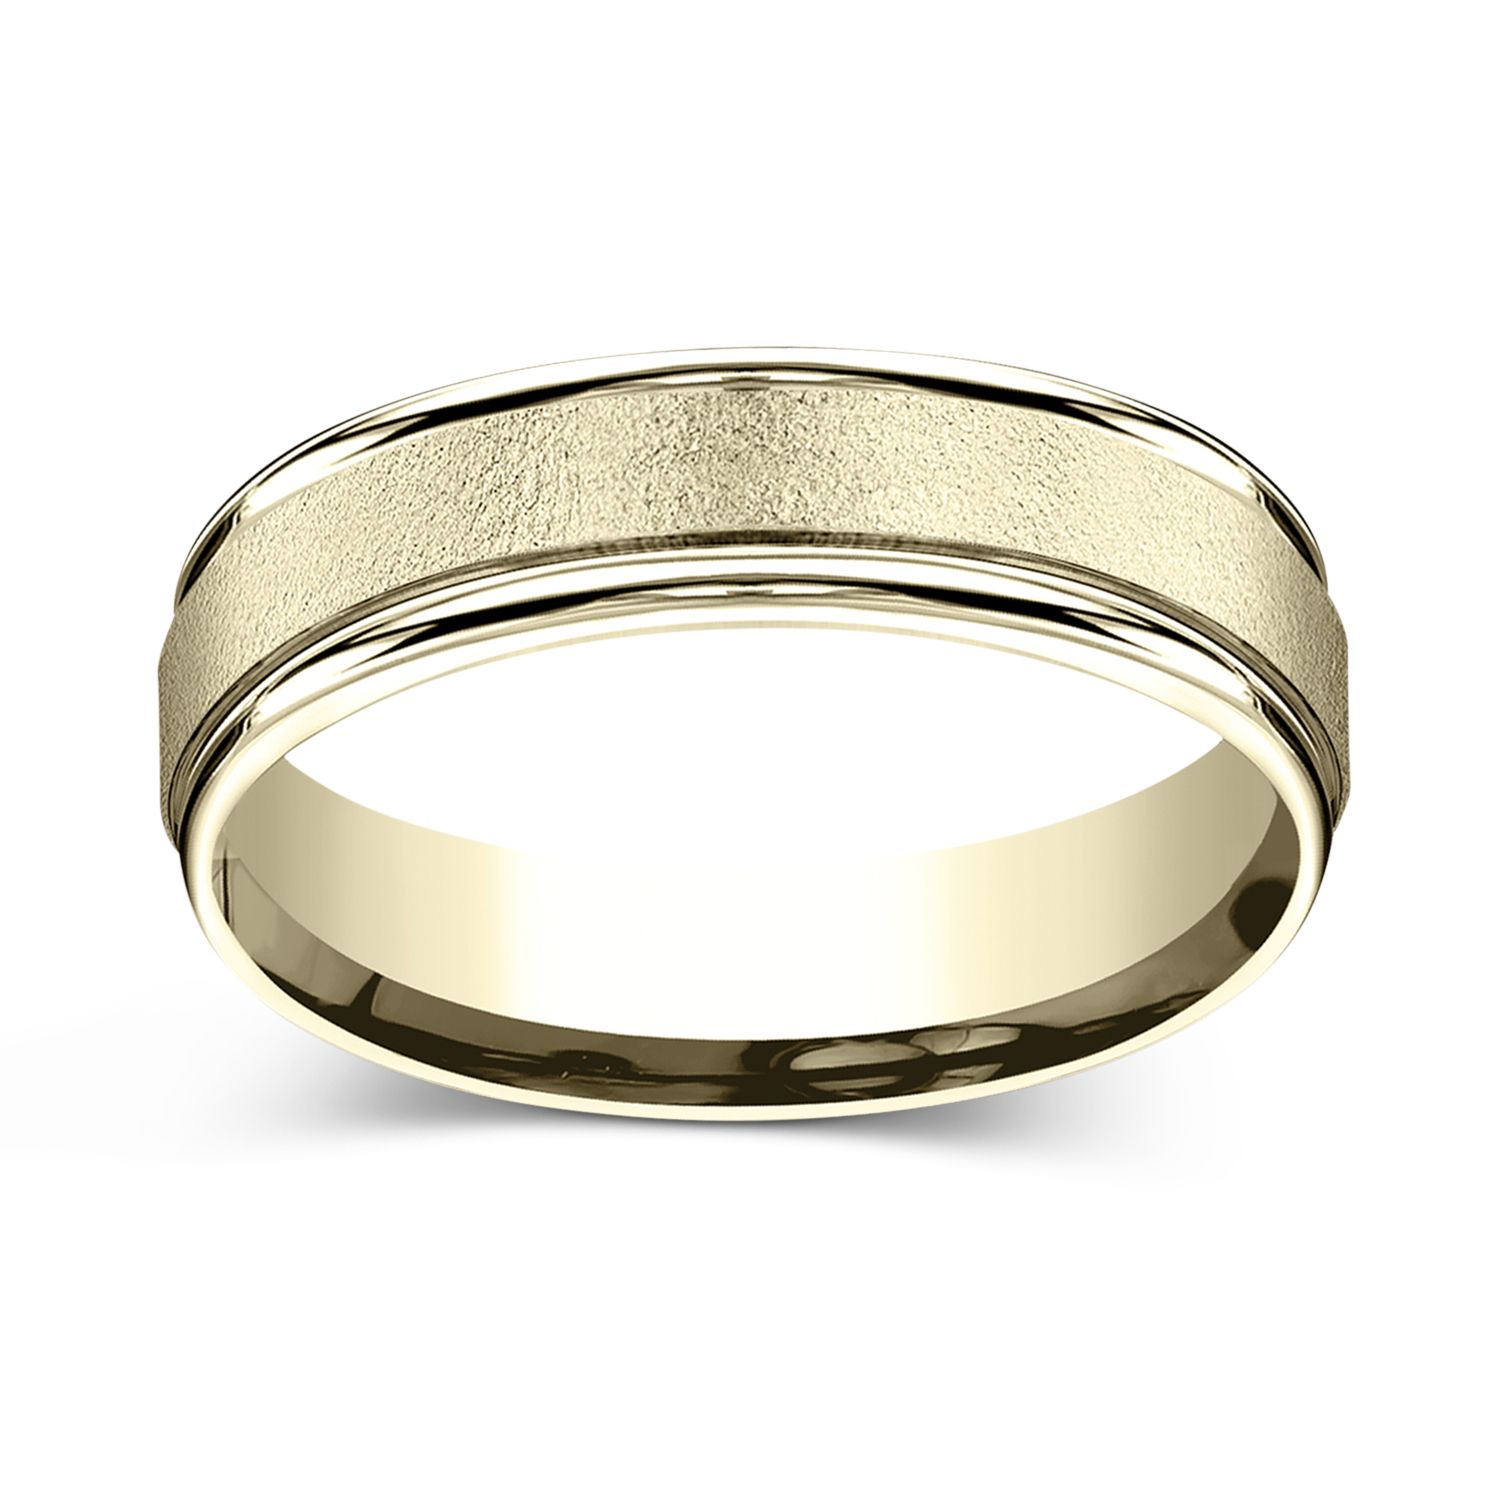 CHARLES & COLVARD: Wired Finish Center With Round Grooved Edges 6.0mm Wedding Band